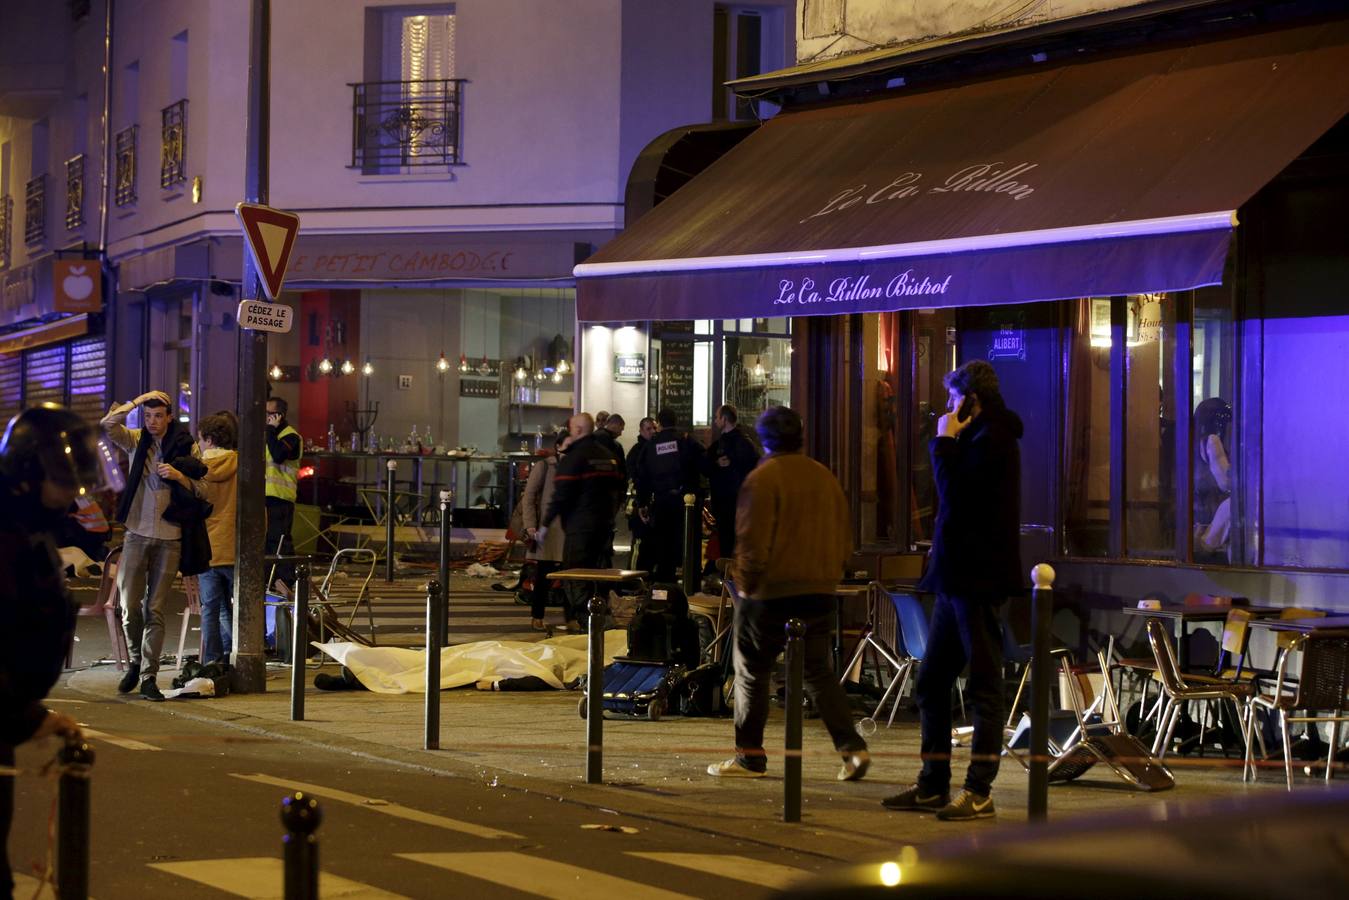 ATTENTION EDITORS - VISUAL COVERAGE OF SCENES OF INJURY OR DEATHGeneral view of the scene with rescue service personnel working near covered bodies outside a restaurant following shooting incidents in Paris, France, November 13, 2015.   REUTERS/Philippe Wojazer